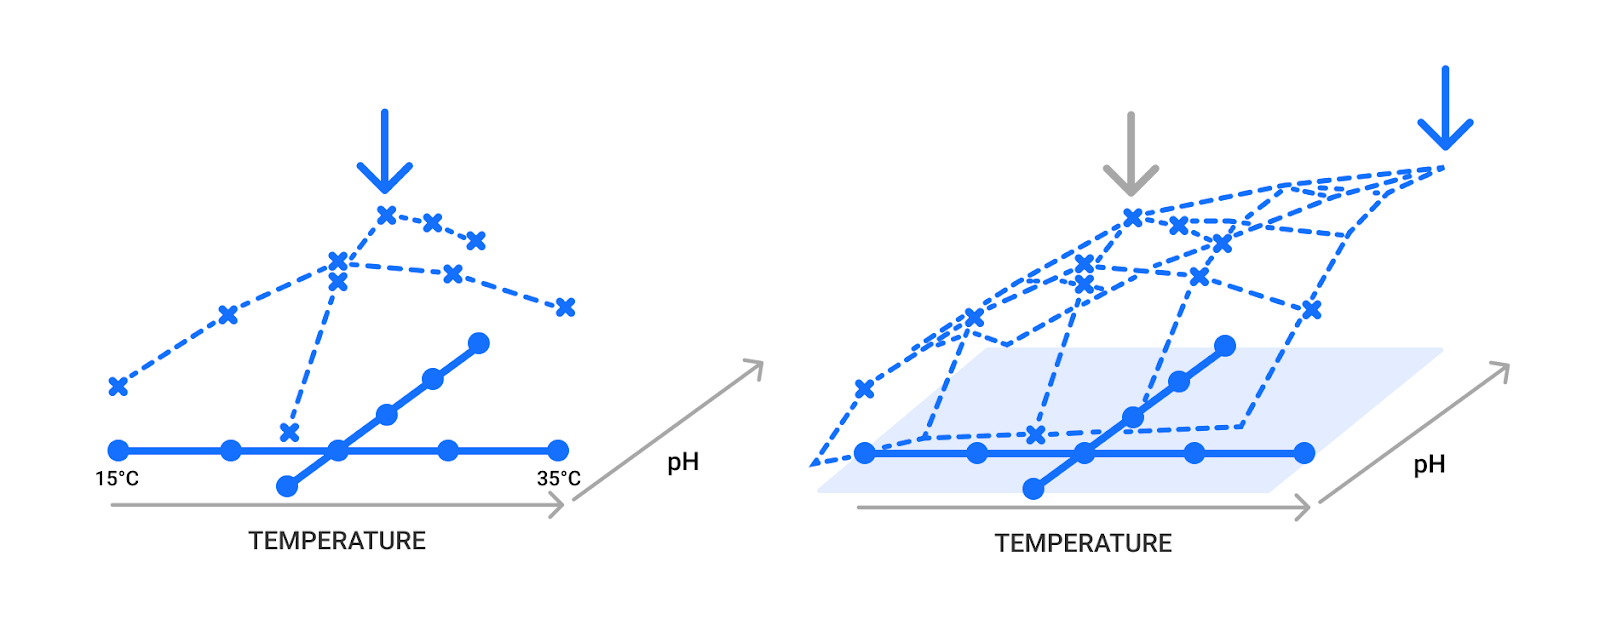 OFAT (one factor at a time) graph shows a flat axis with an optima for two factors. The second graph represents design of experiments (DOE) in three dimensions, showing how multiple factors interact with each other for a true optima and better understanding of the design space.